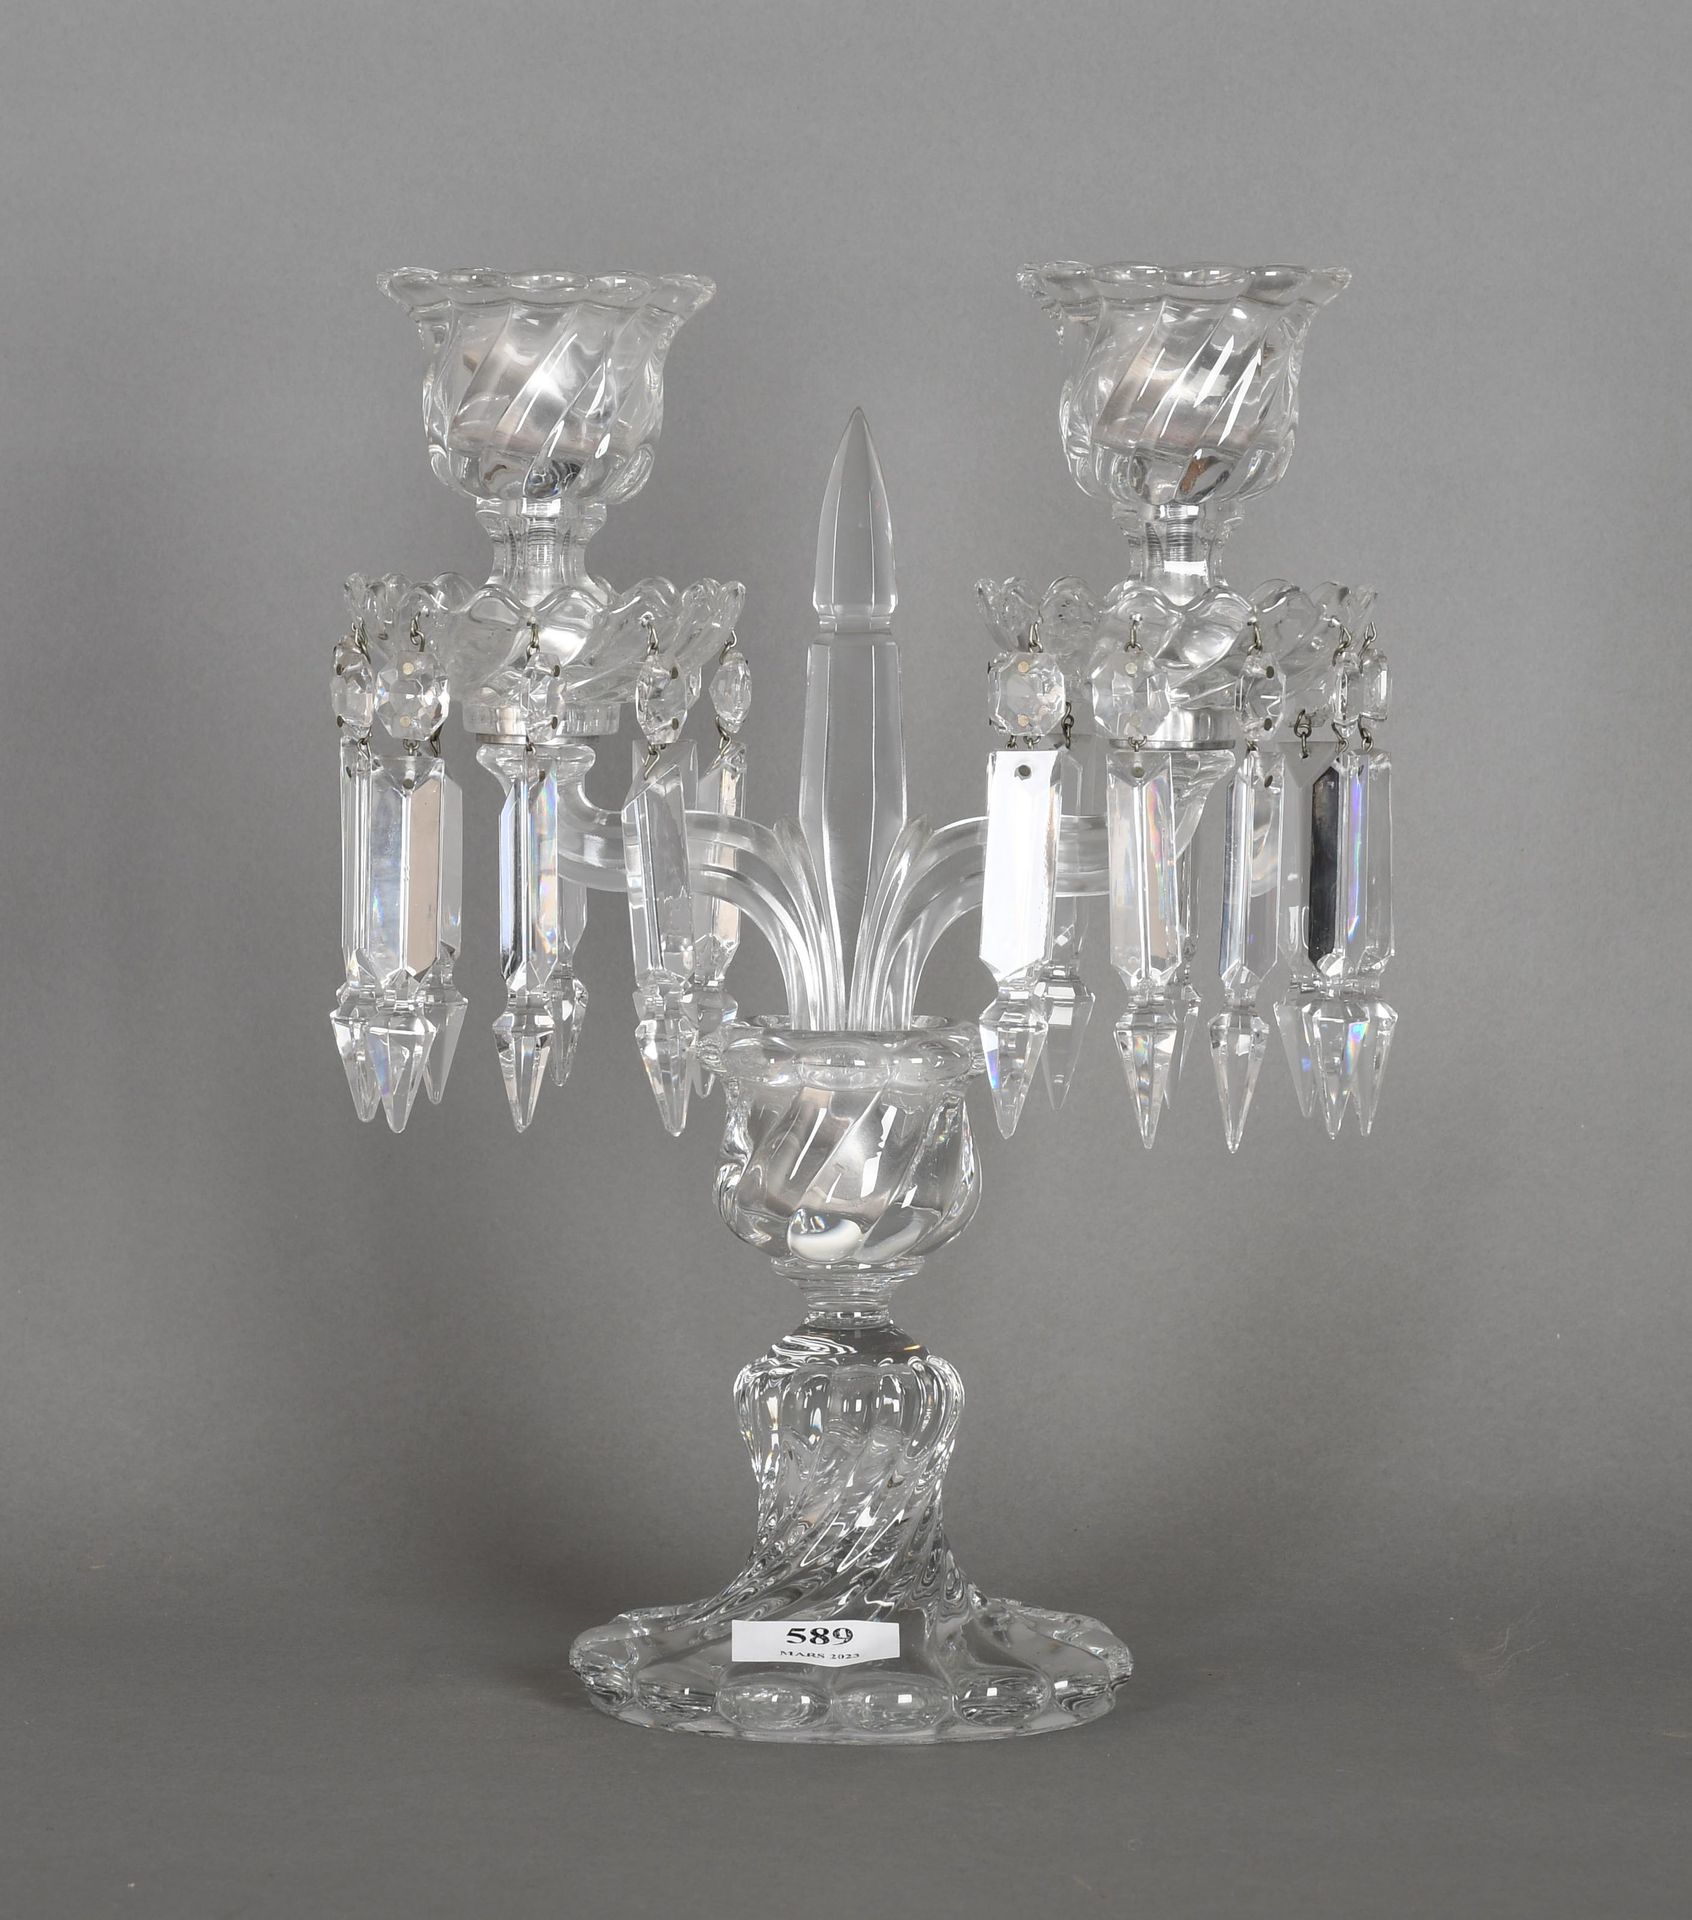 Null Baccarat
Candelabra in molded crystal torso and pendants, with two arms. He&hellip;